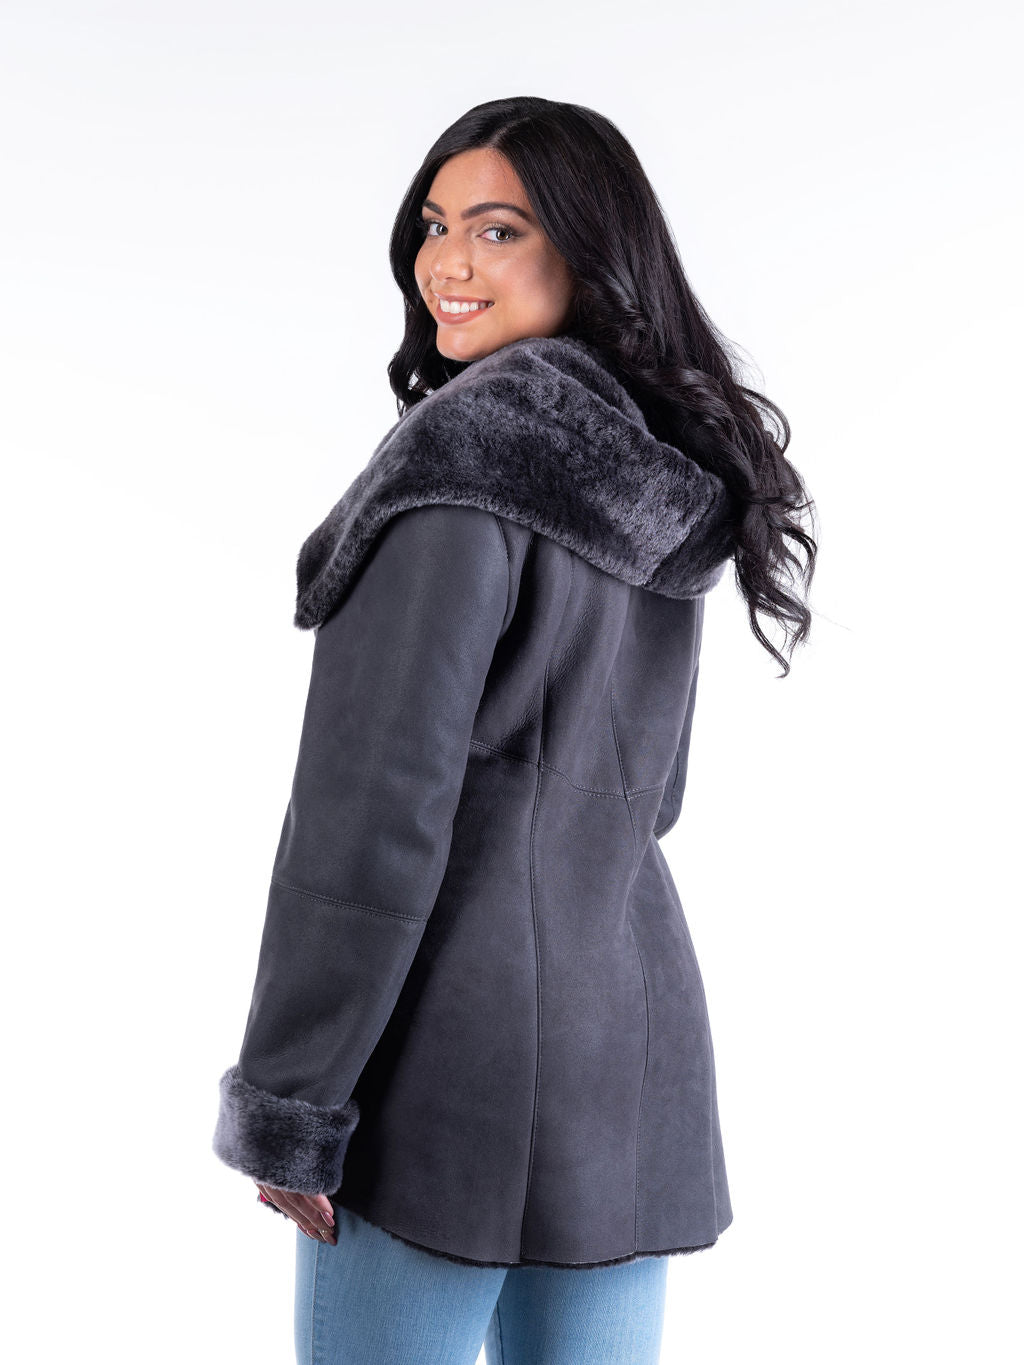 Veronica Hooded Sheepskin Coat in Grey (only 1 left in US size 12-14)